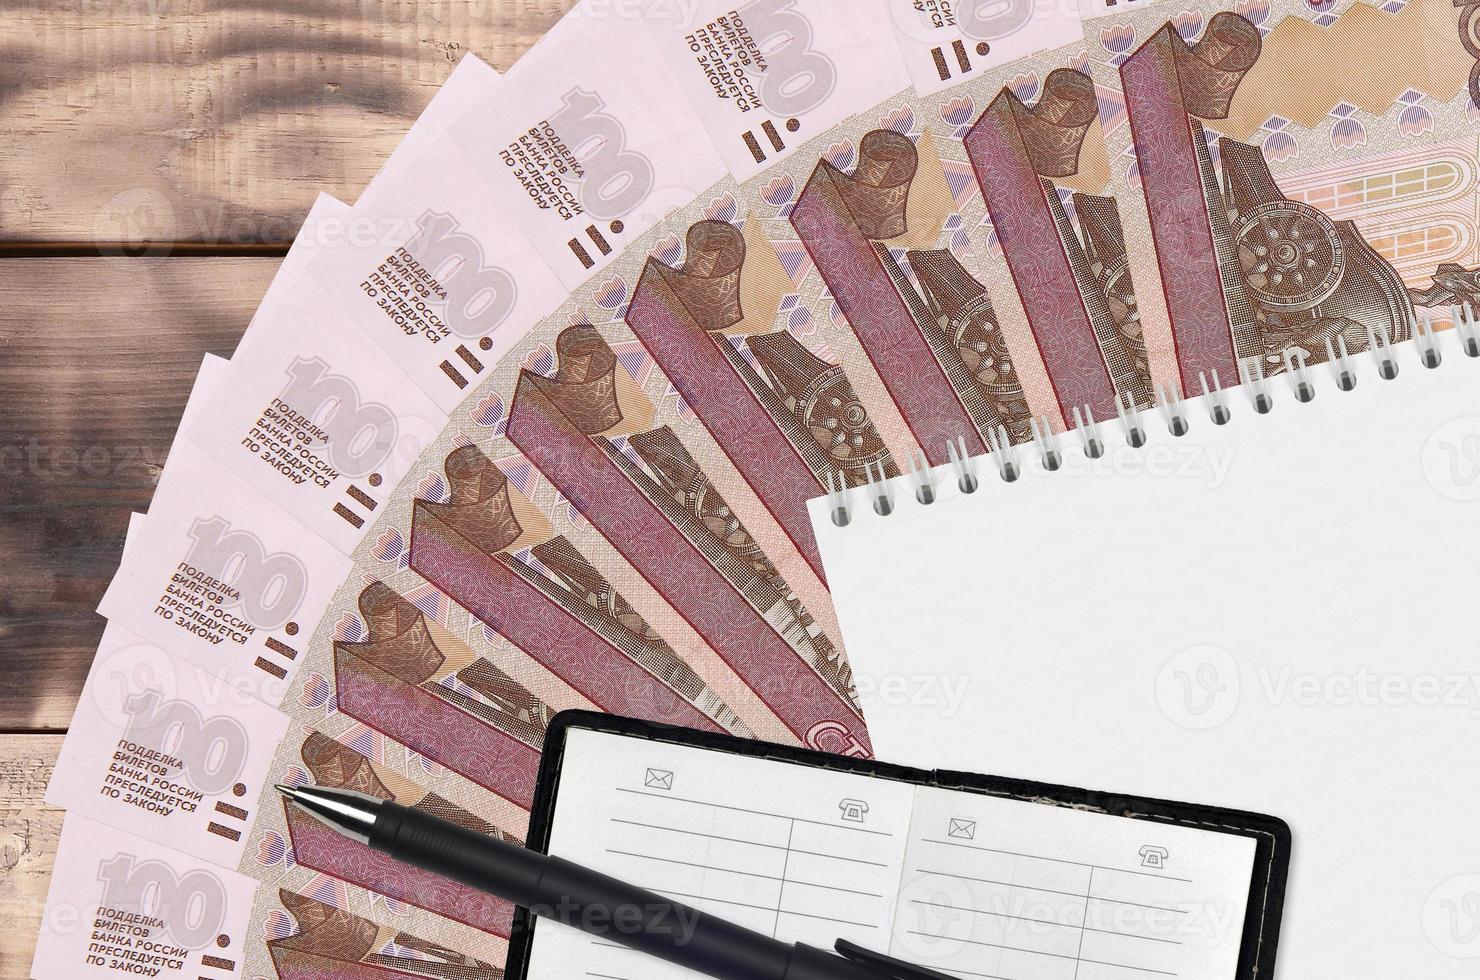 100 russian rubles bills fan and notepad with contact book and black pen. Concept of financial planning and business strategy photo